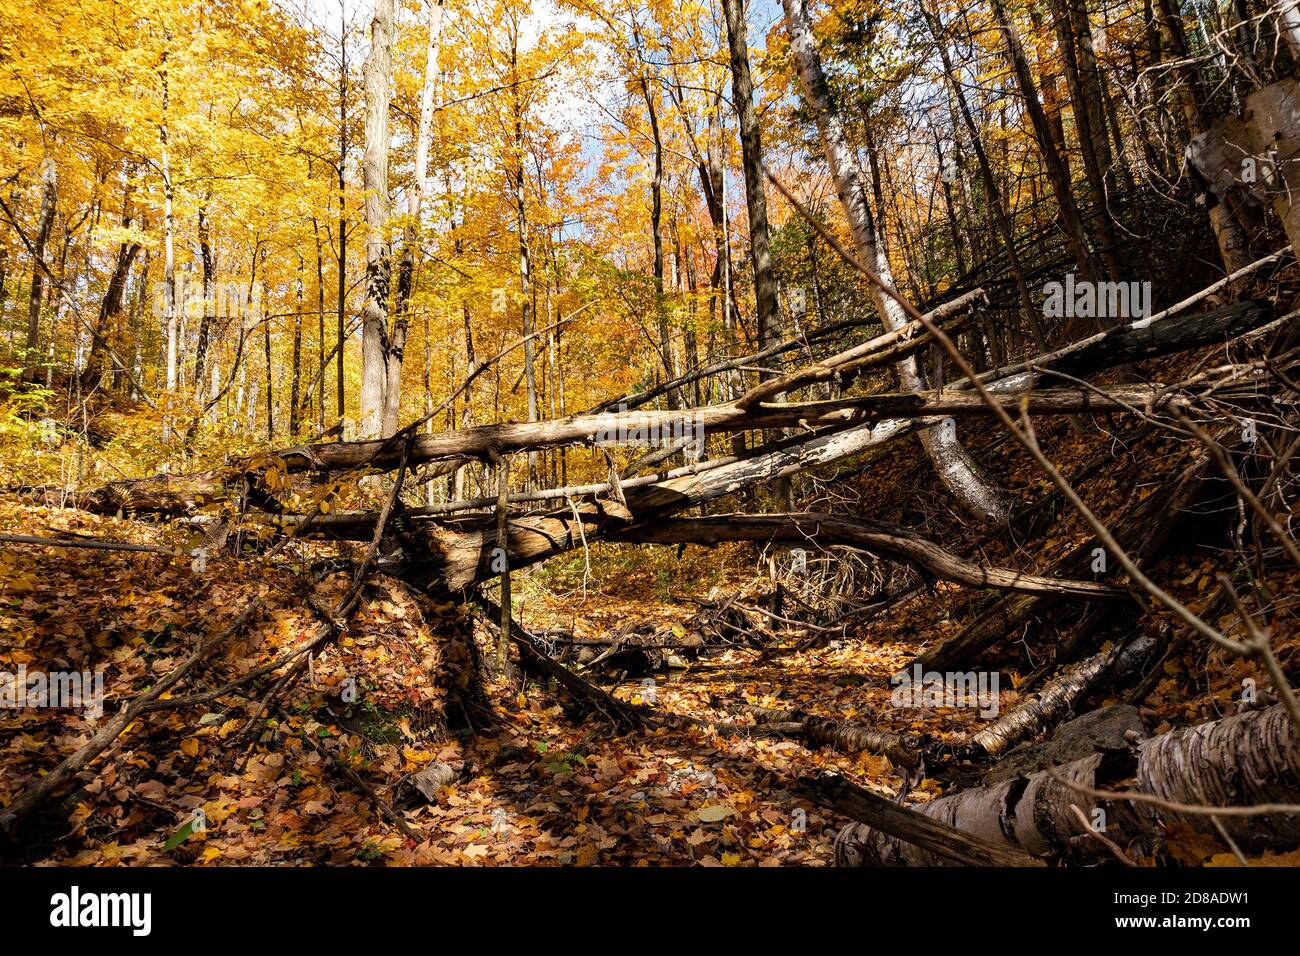 Wild forest, untouched nature with fallen trees and streams with fallen leaves in them Stock Photo